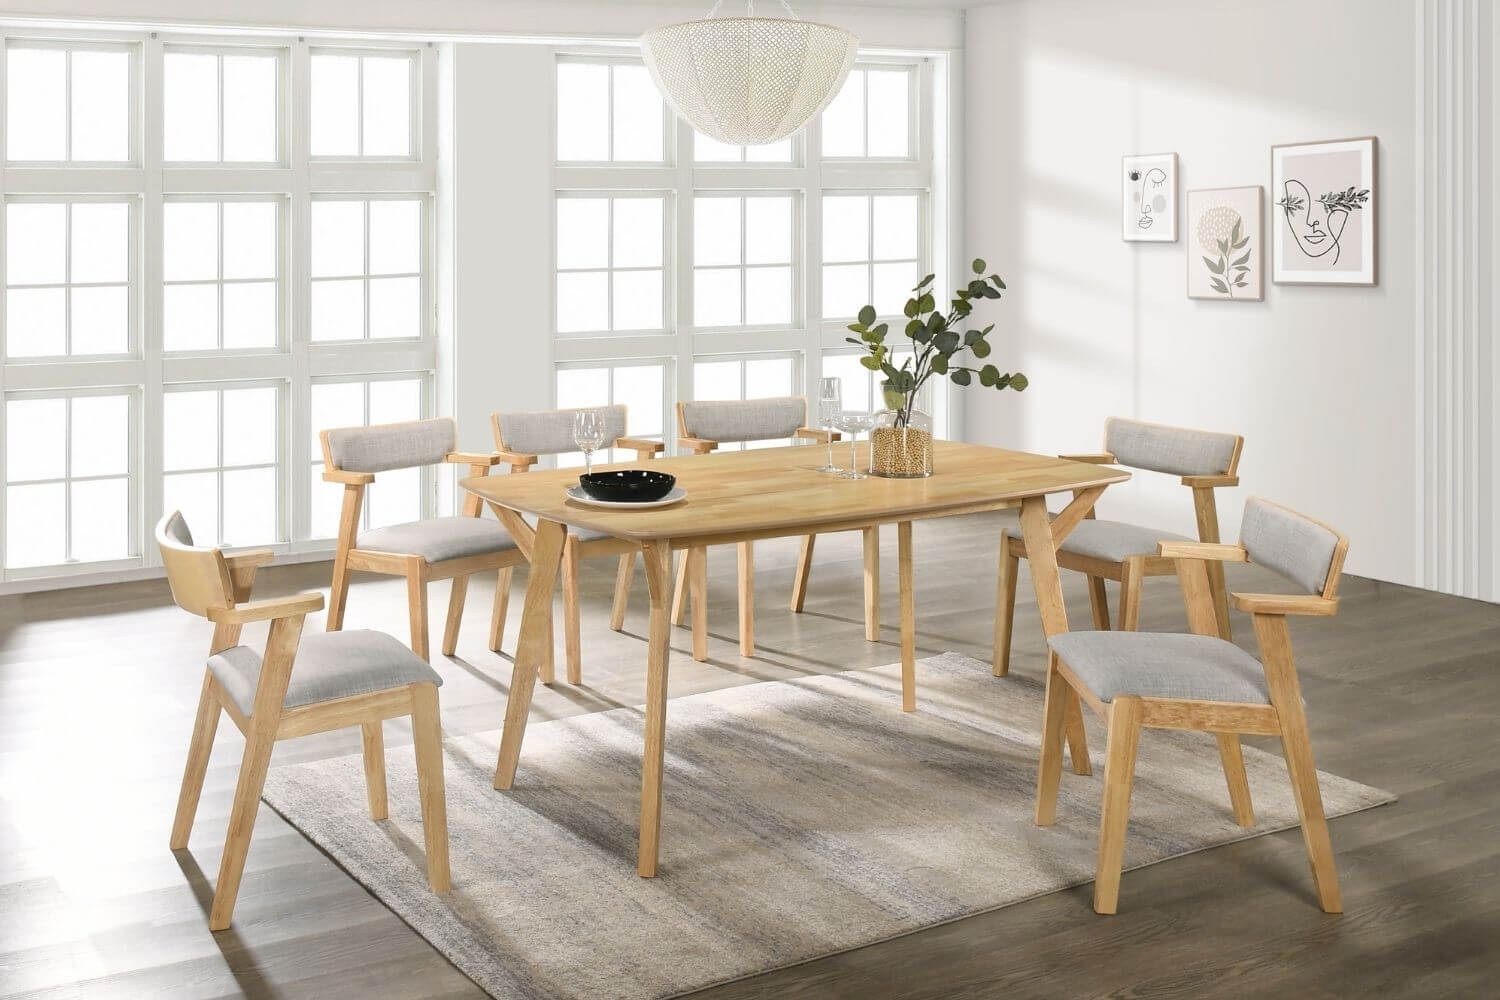 Elmo Dining Chair: Style & Comfort in Natural-Upinteriors